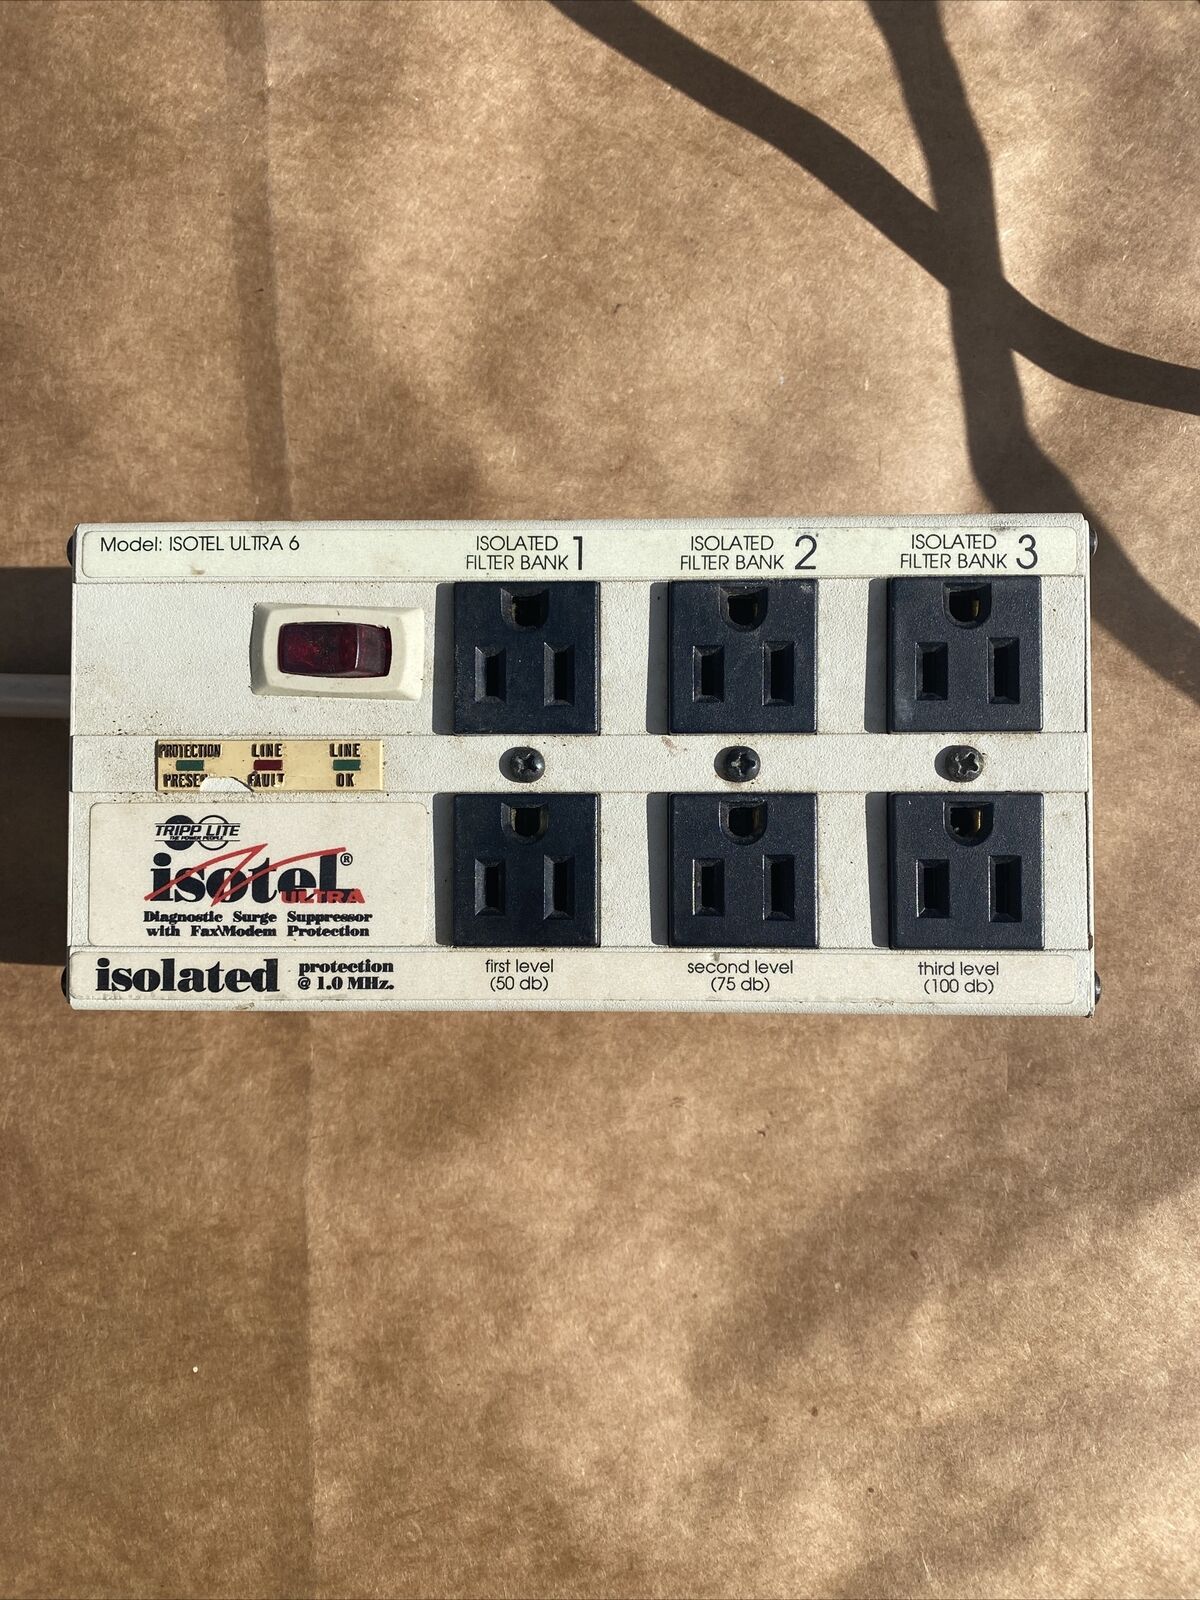 ISOTEL ULTRA 6 DIAGNOSTIC SURGE SUPPRESSOR with FAX/MODEM PROTECTION UNIT